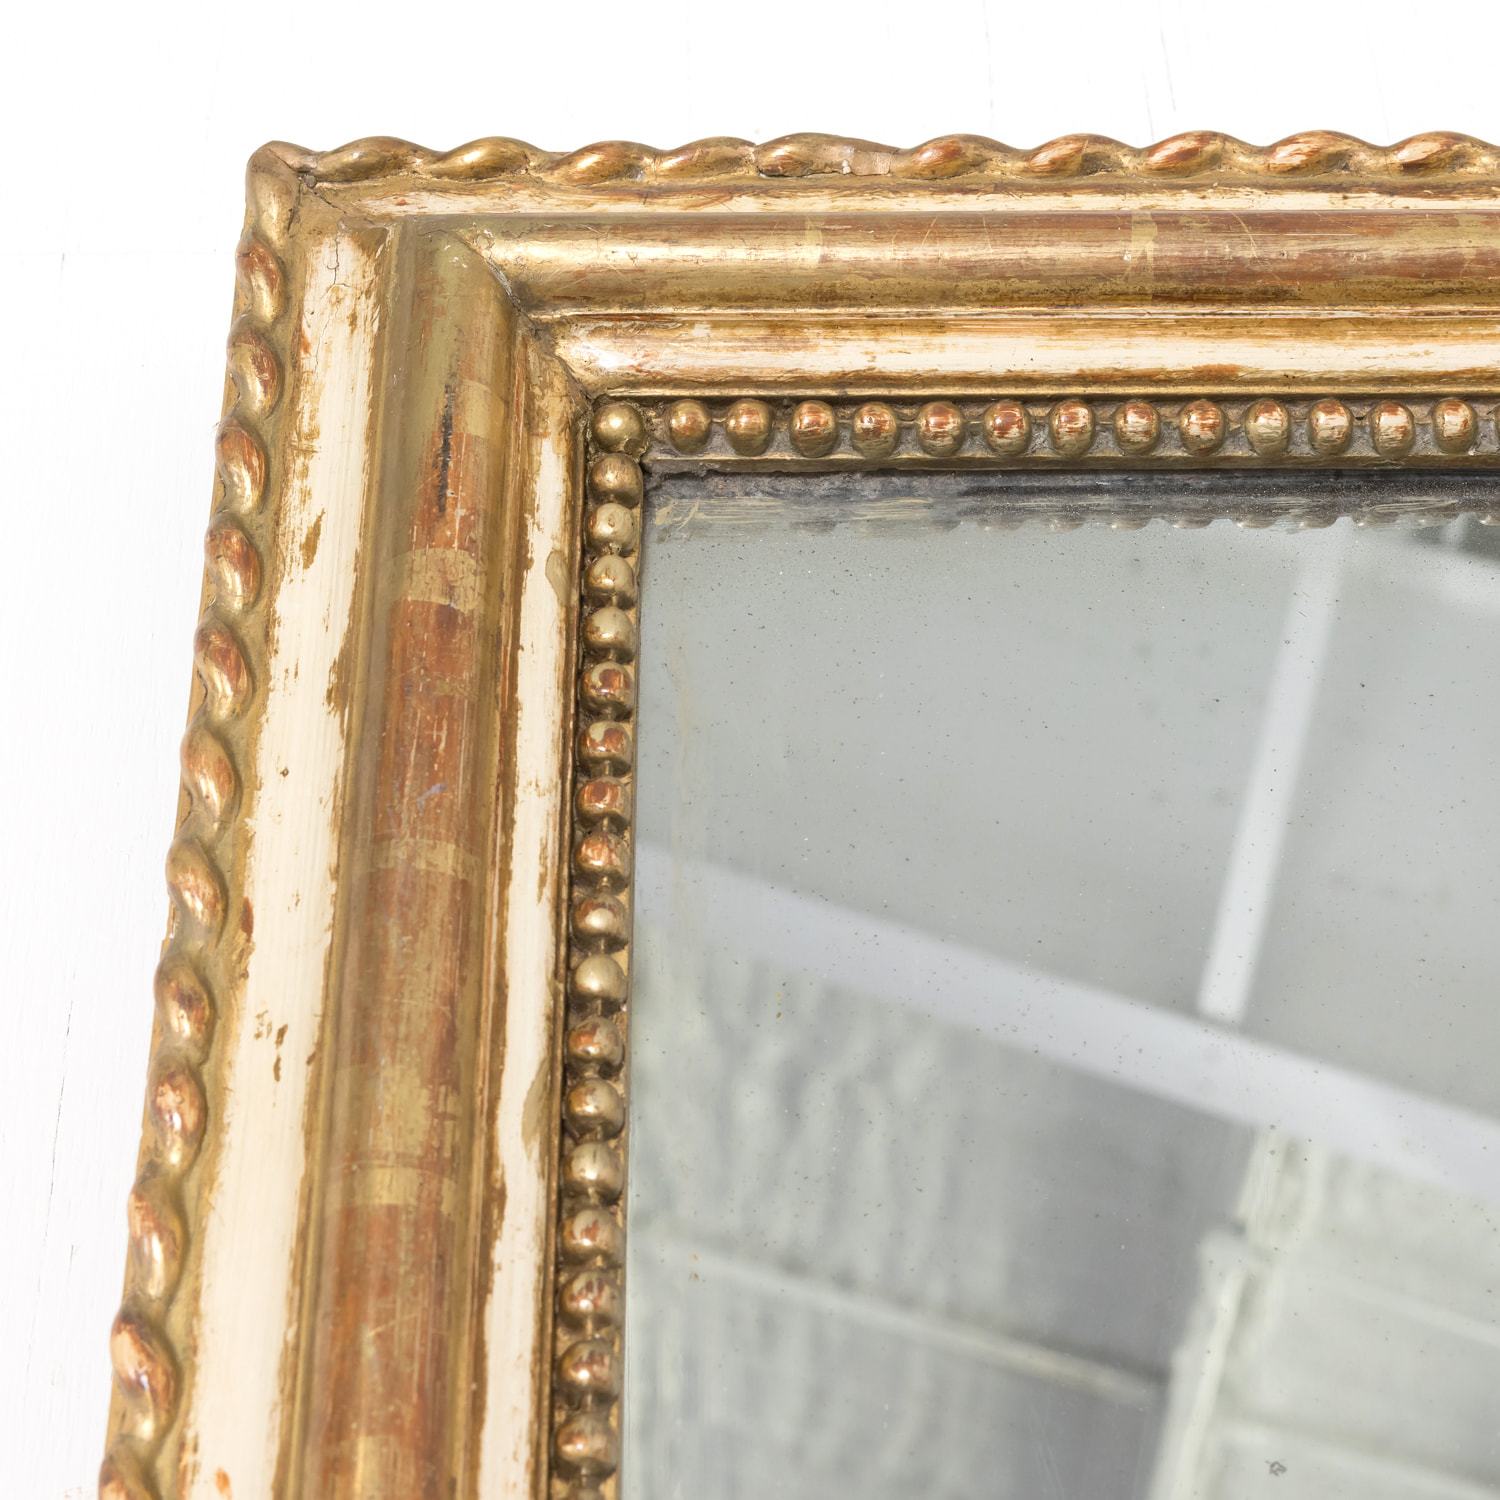 A Painted Antique Louis Philippe Mirror in Antique French Mirrors